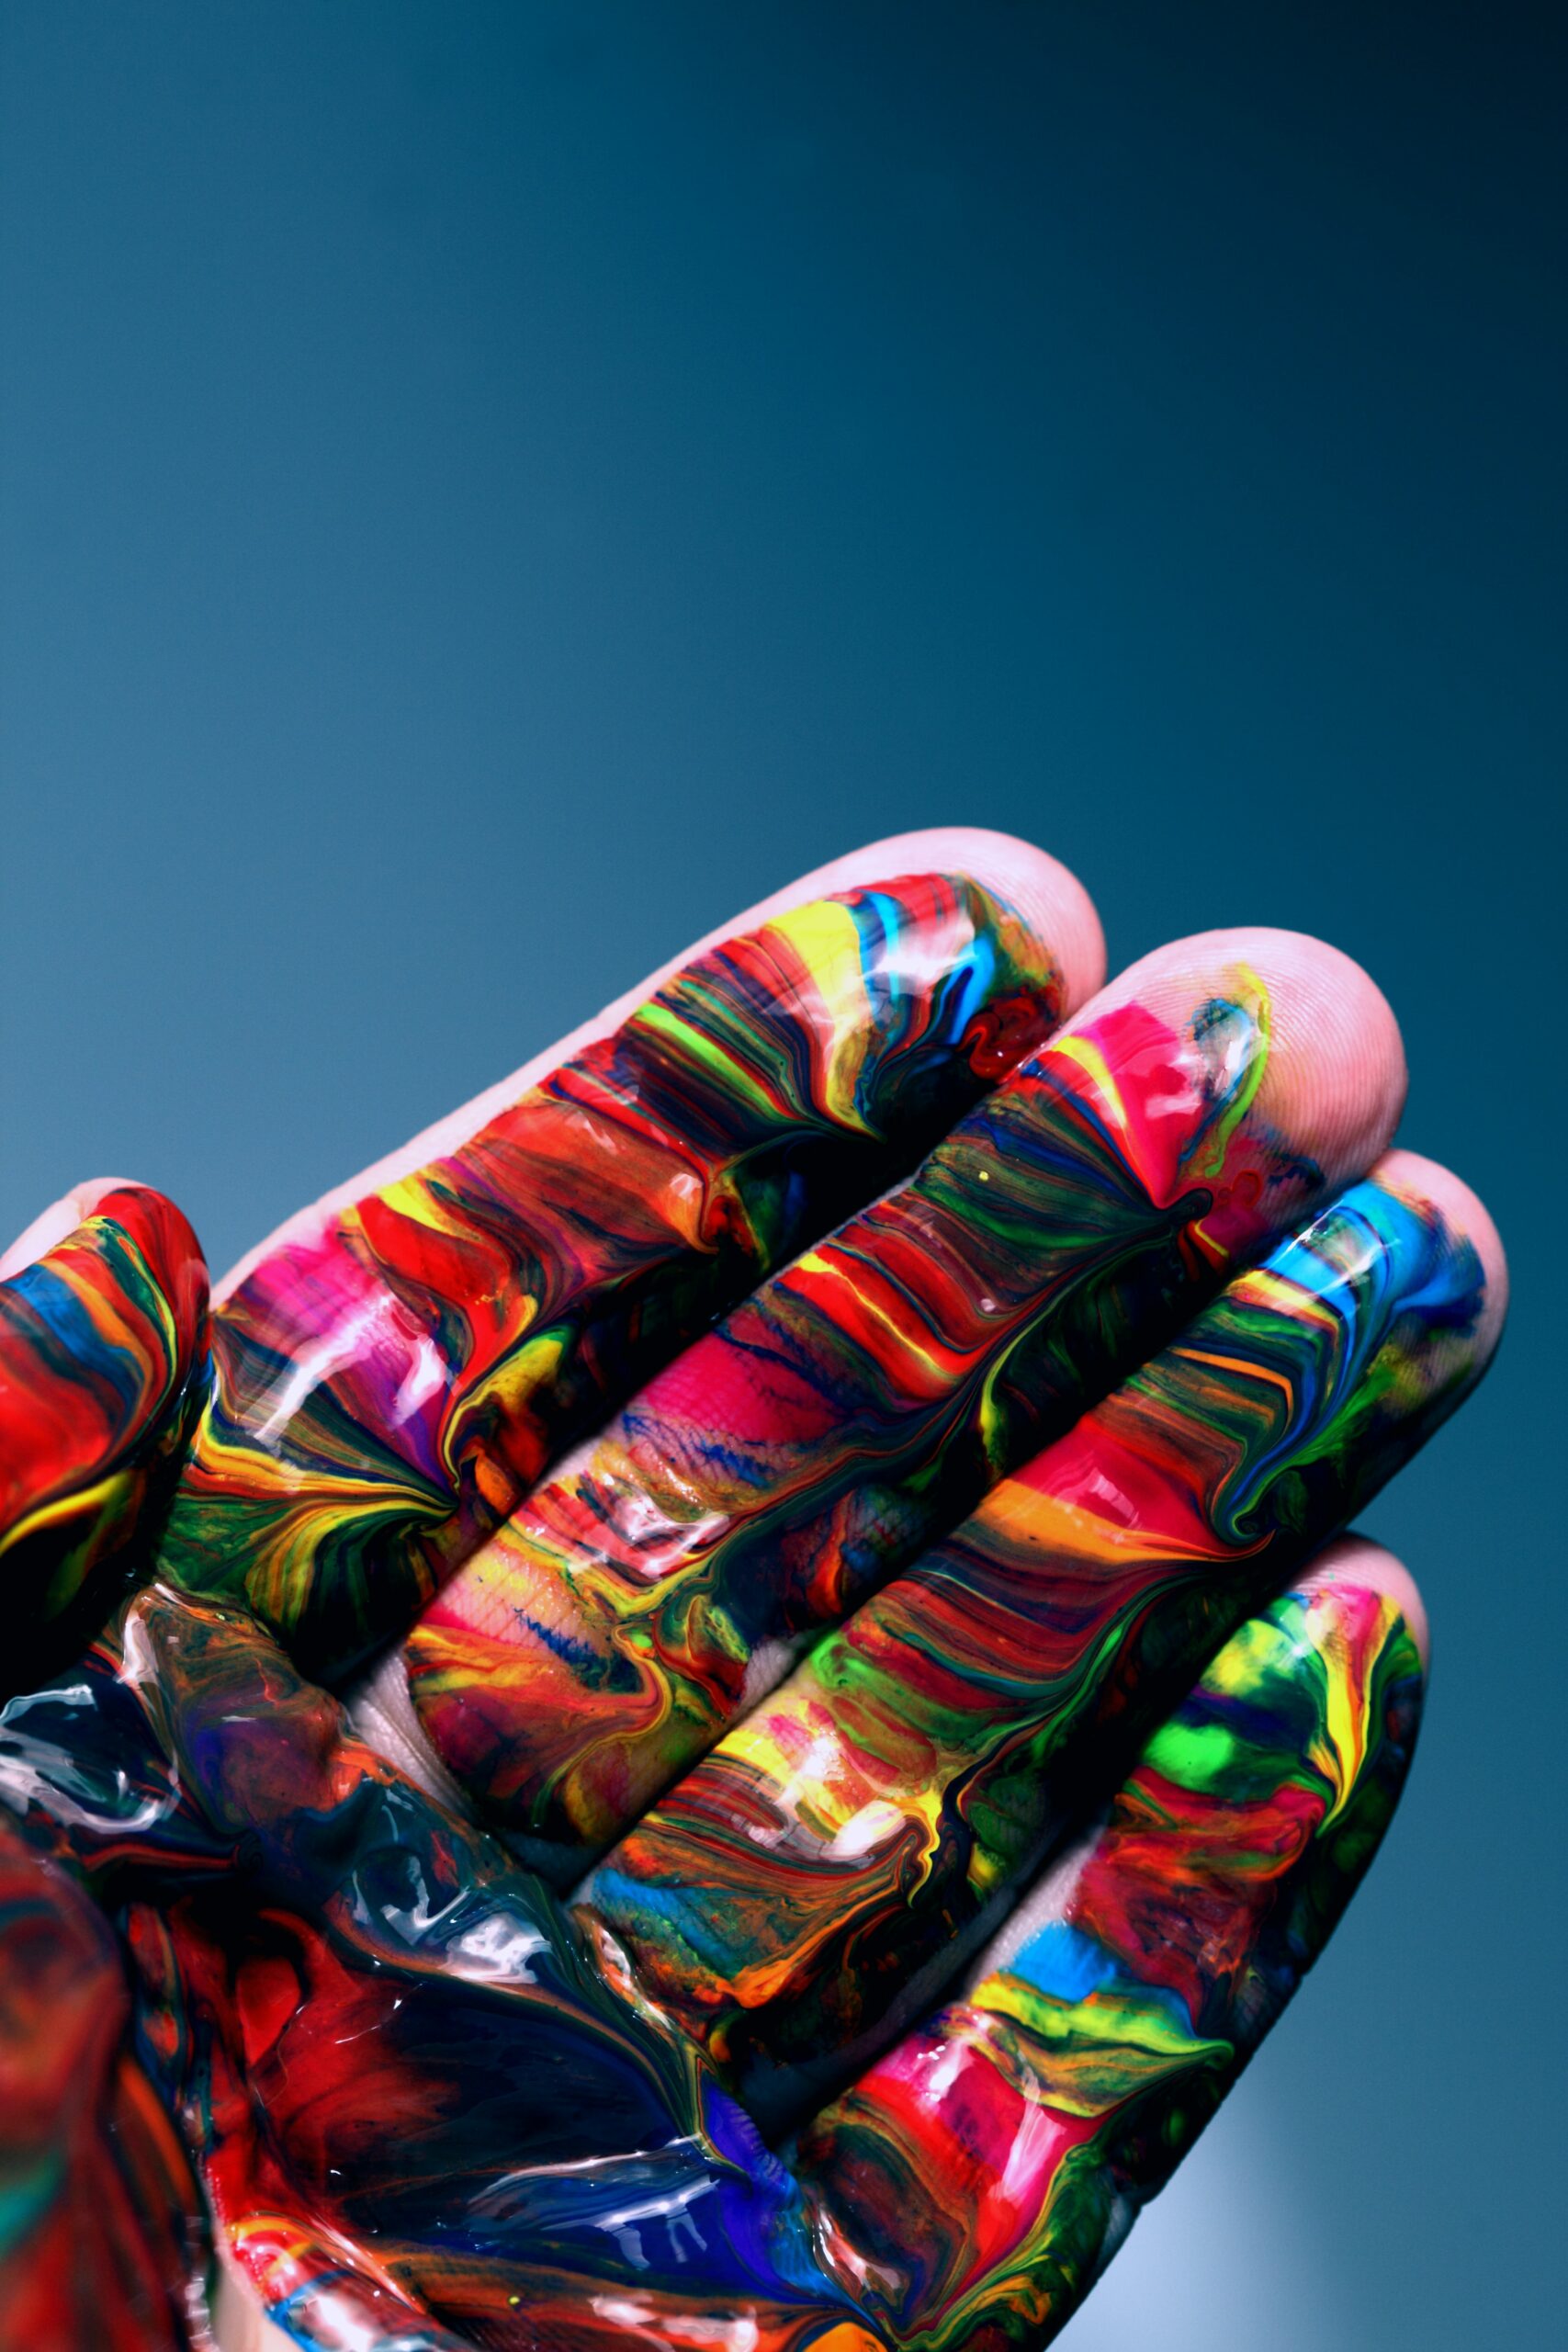 A hand is covered in all colours of paint imaginable. The paint is tightly layered, and looks complex.